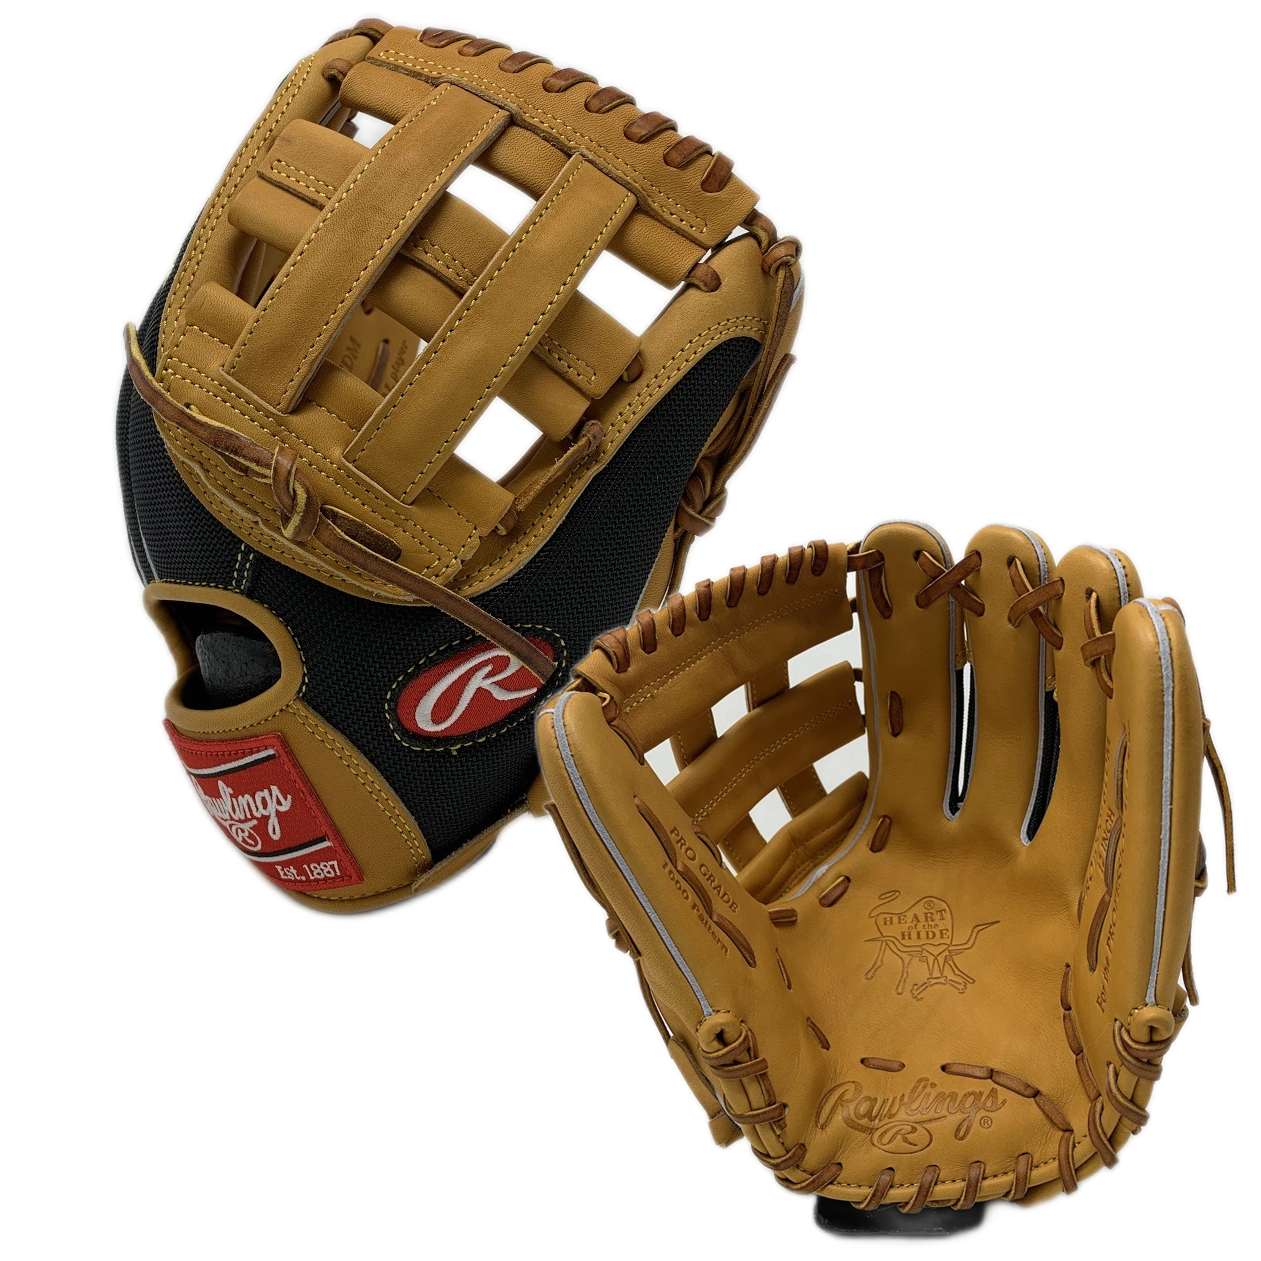 rawlings-heart-of-the-hide-12-inch-baseball-glove-1000-deco-mesh-pro-h-web-right-hand-throw PRO1000-6TDM-RightHandThrow Rawlings  <p><span style=font-size large;>Max 2 Per Customer</span></p> <p><span style=font-size large;>Constructed from Rawlings